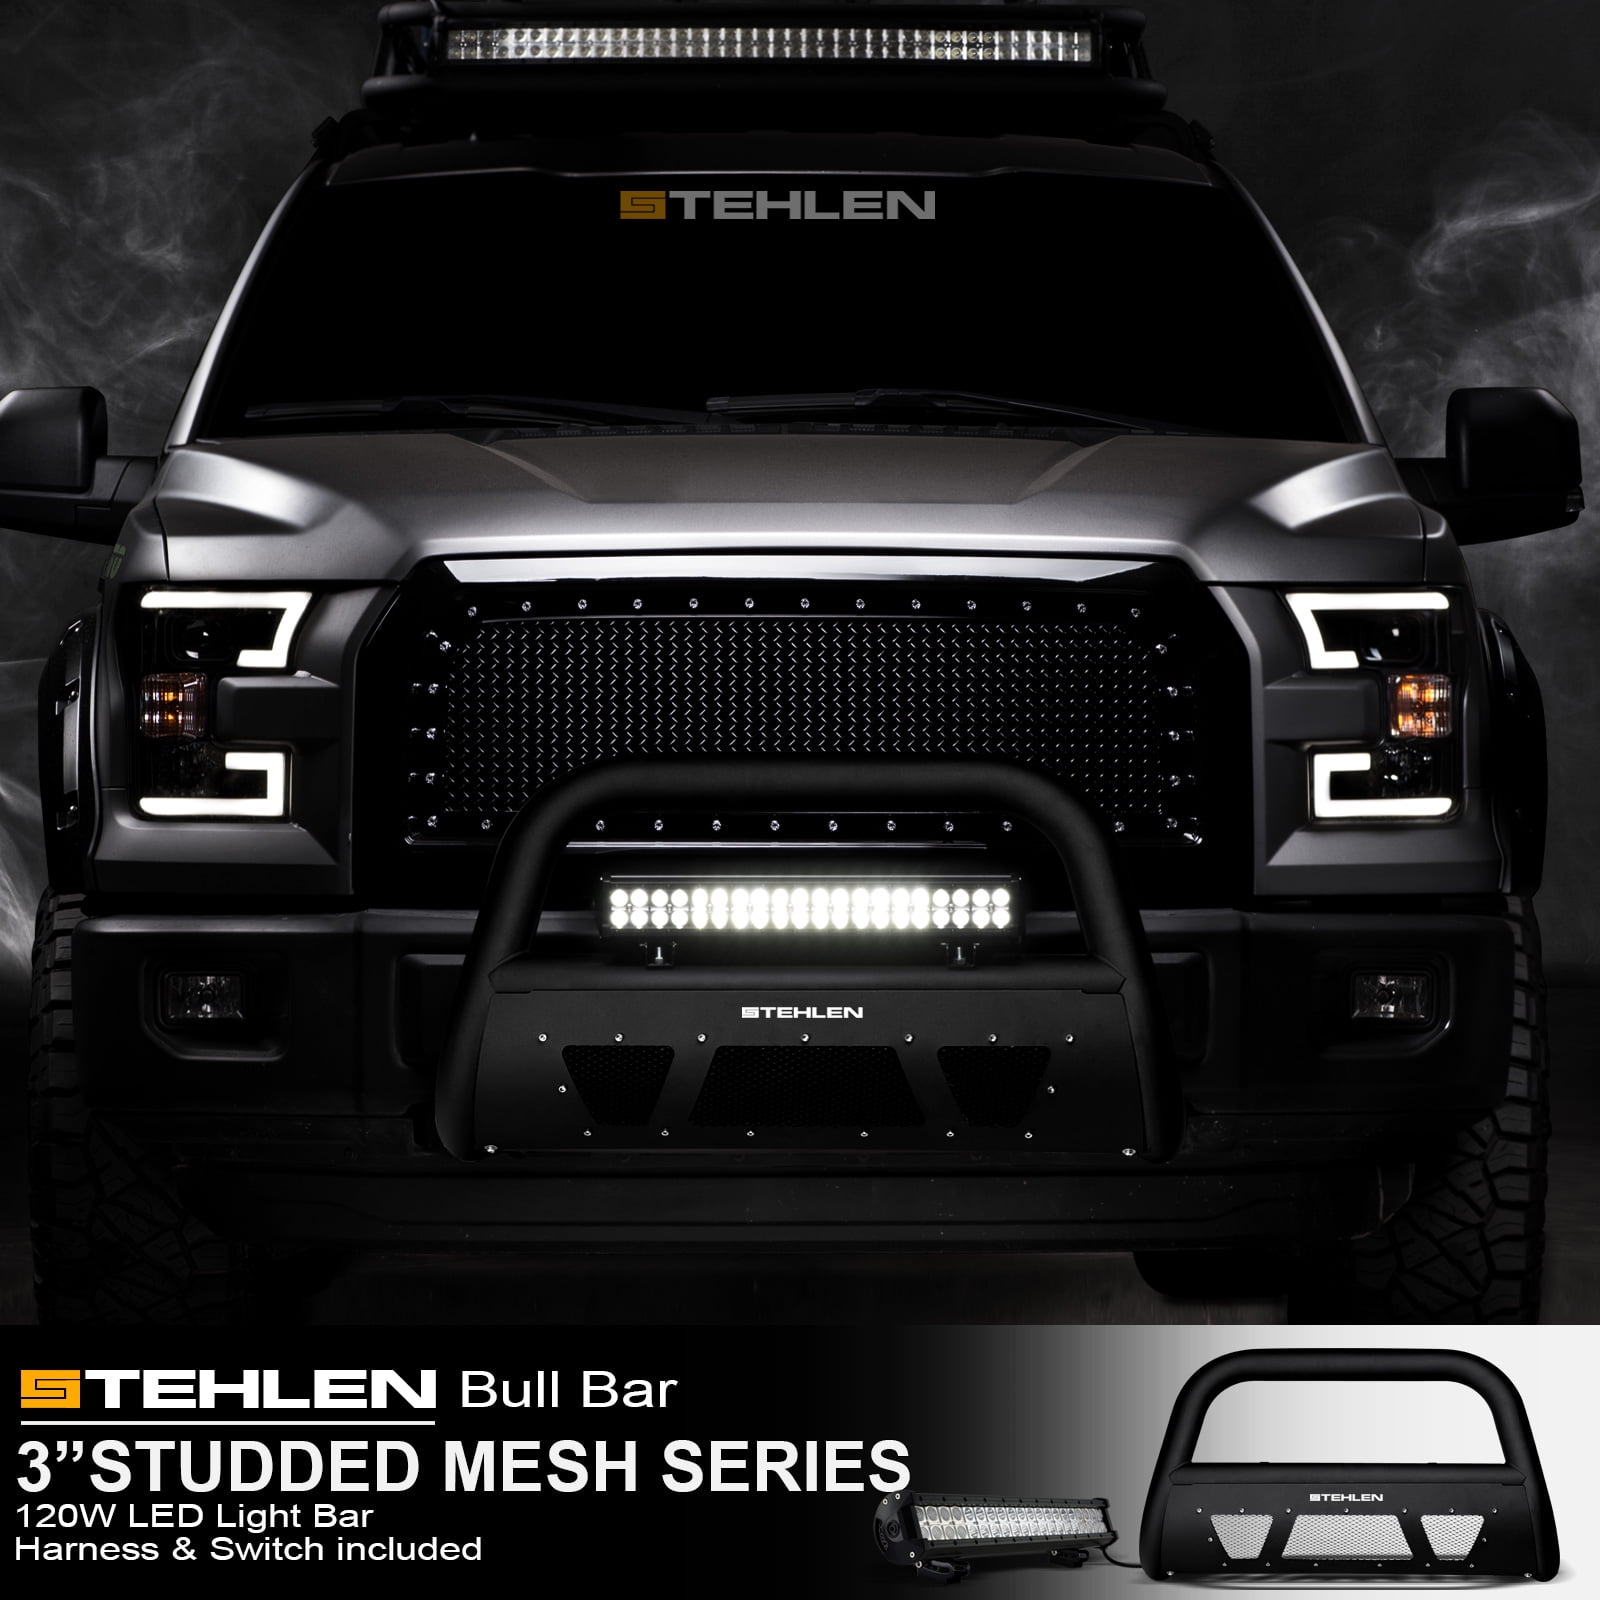 Stehlen 733469494591 3 Studded Mesh Series Bull Bar Matte Black with 120W CREE LED Lights Bar For 15-19 Chevy Colorado/GMC Canyon 